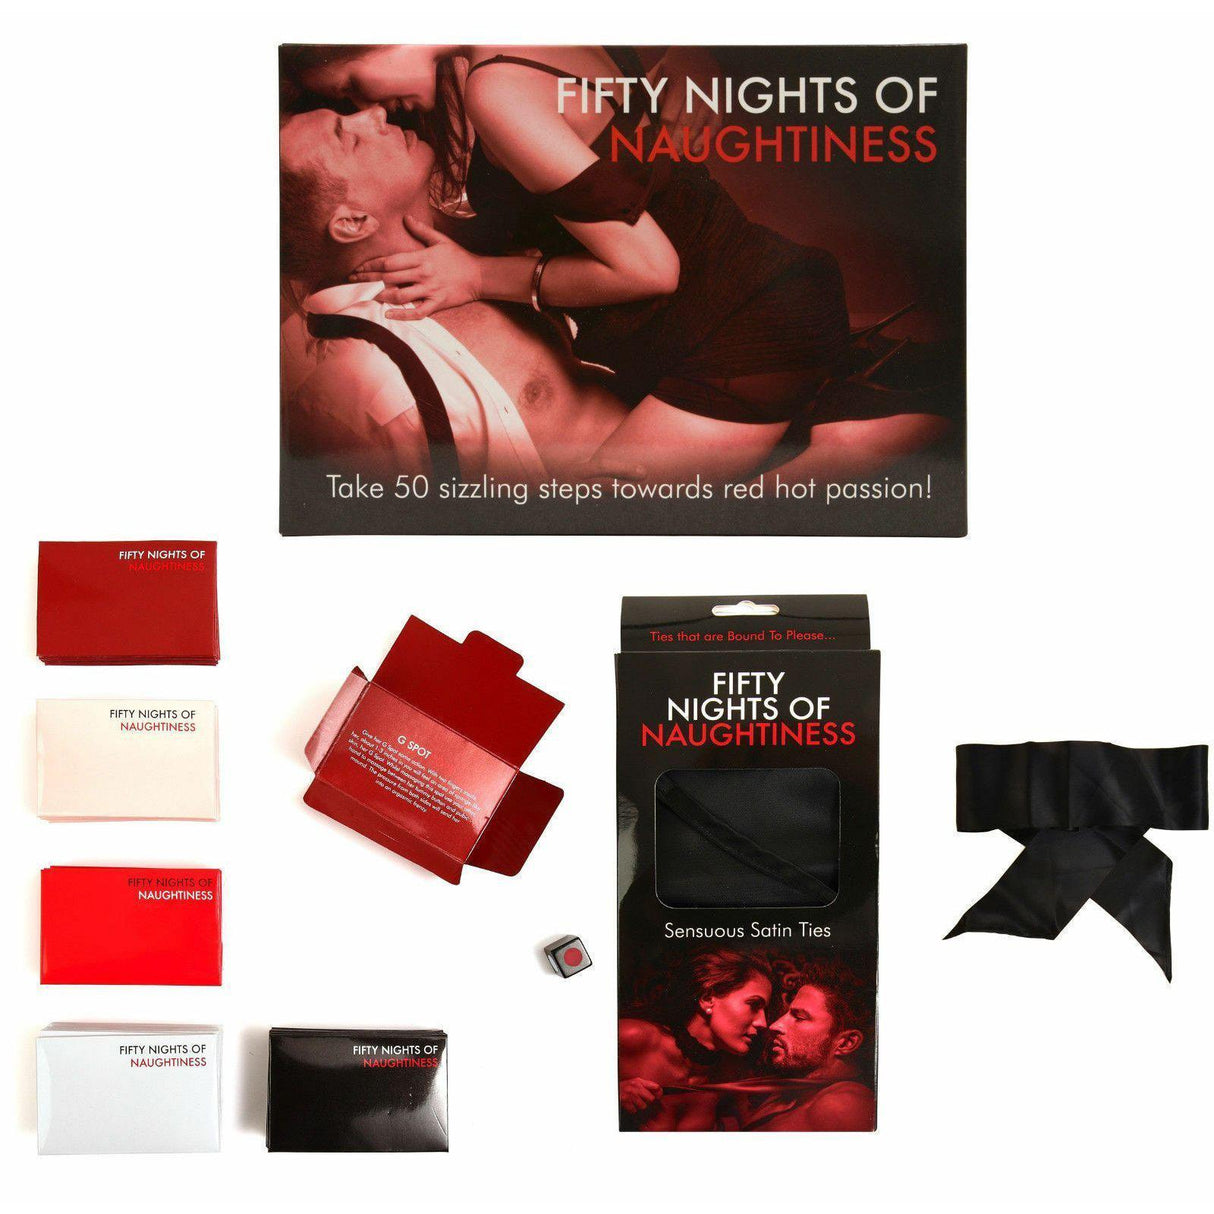 Fifty Nights Of Naughtiness Couples Collection Game